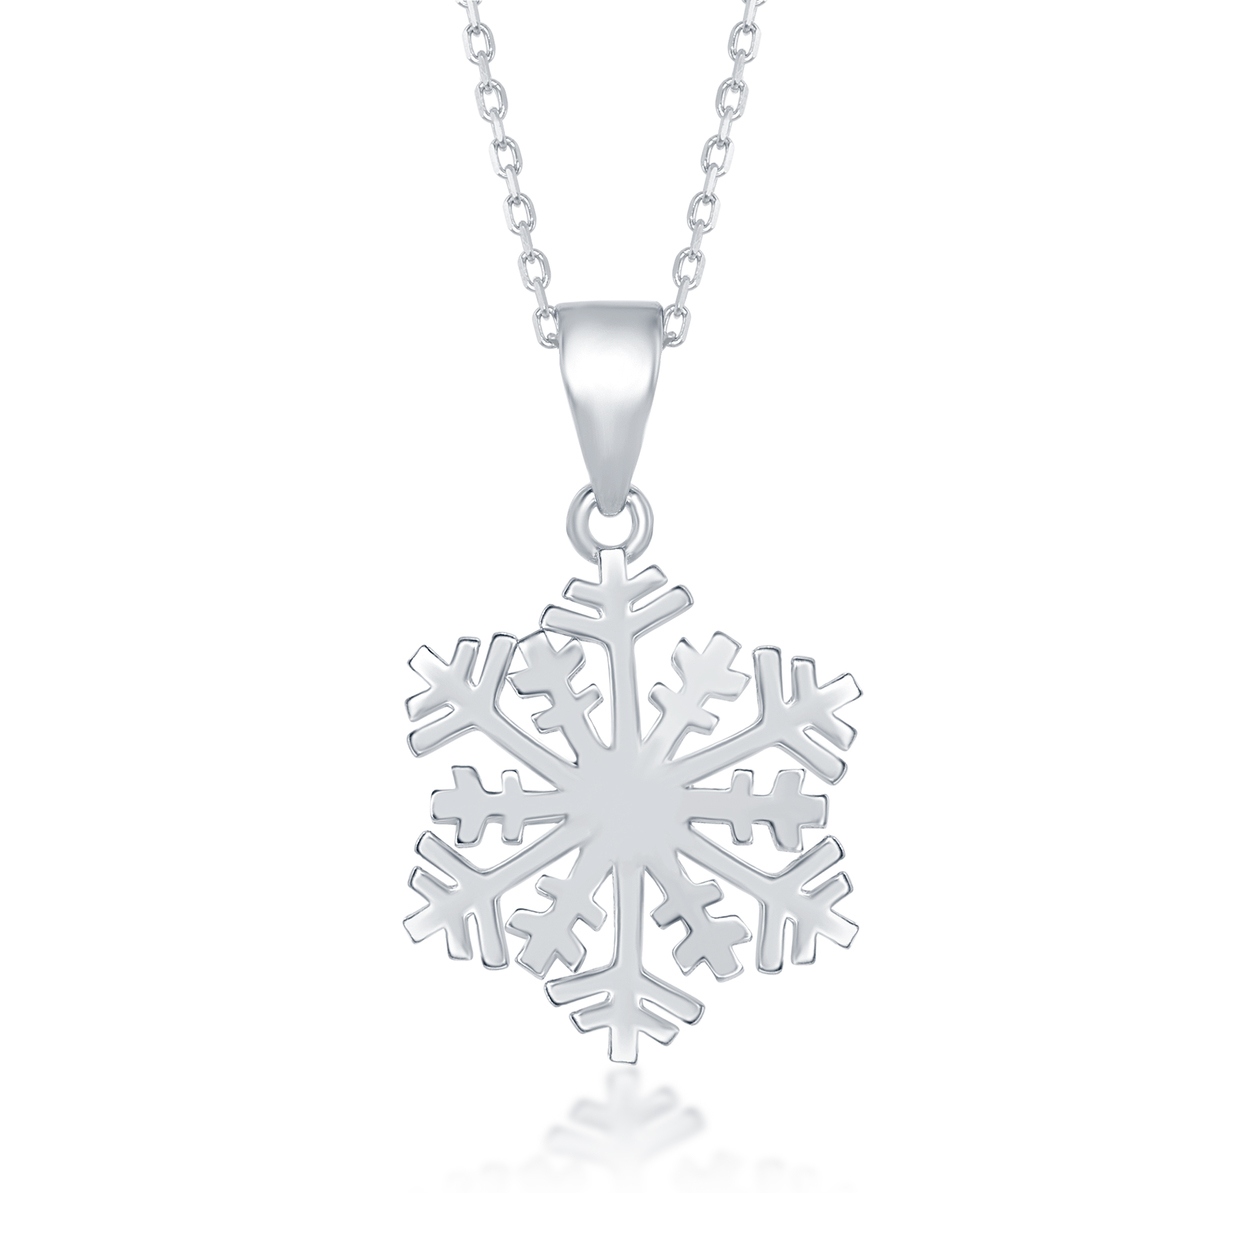 Shiny Sterling Silver Snowflake Pendant with Chain - J-2456 - Click Image to Close